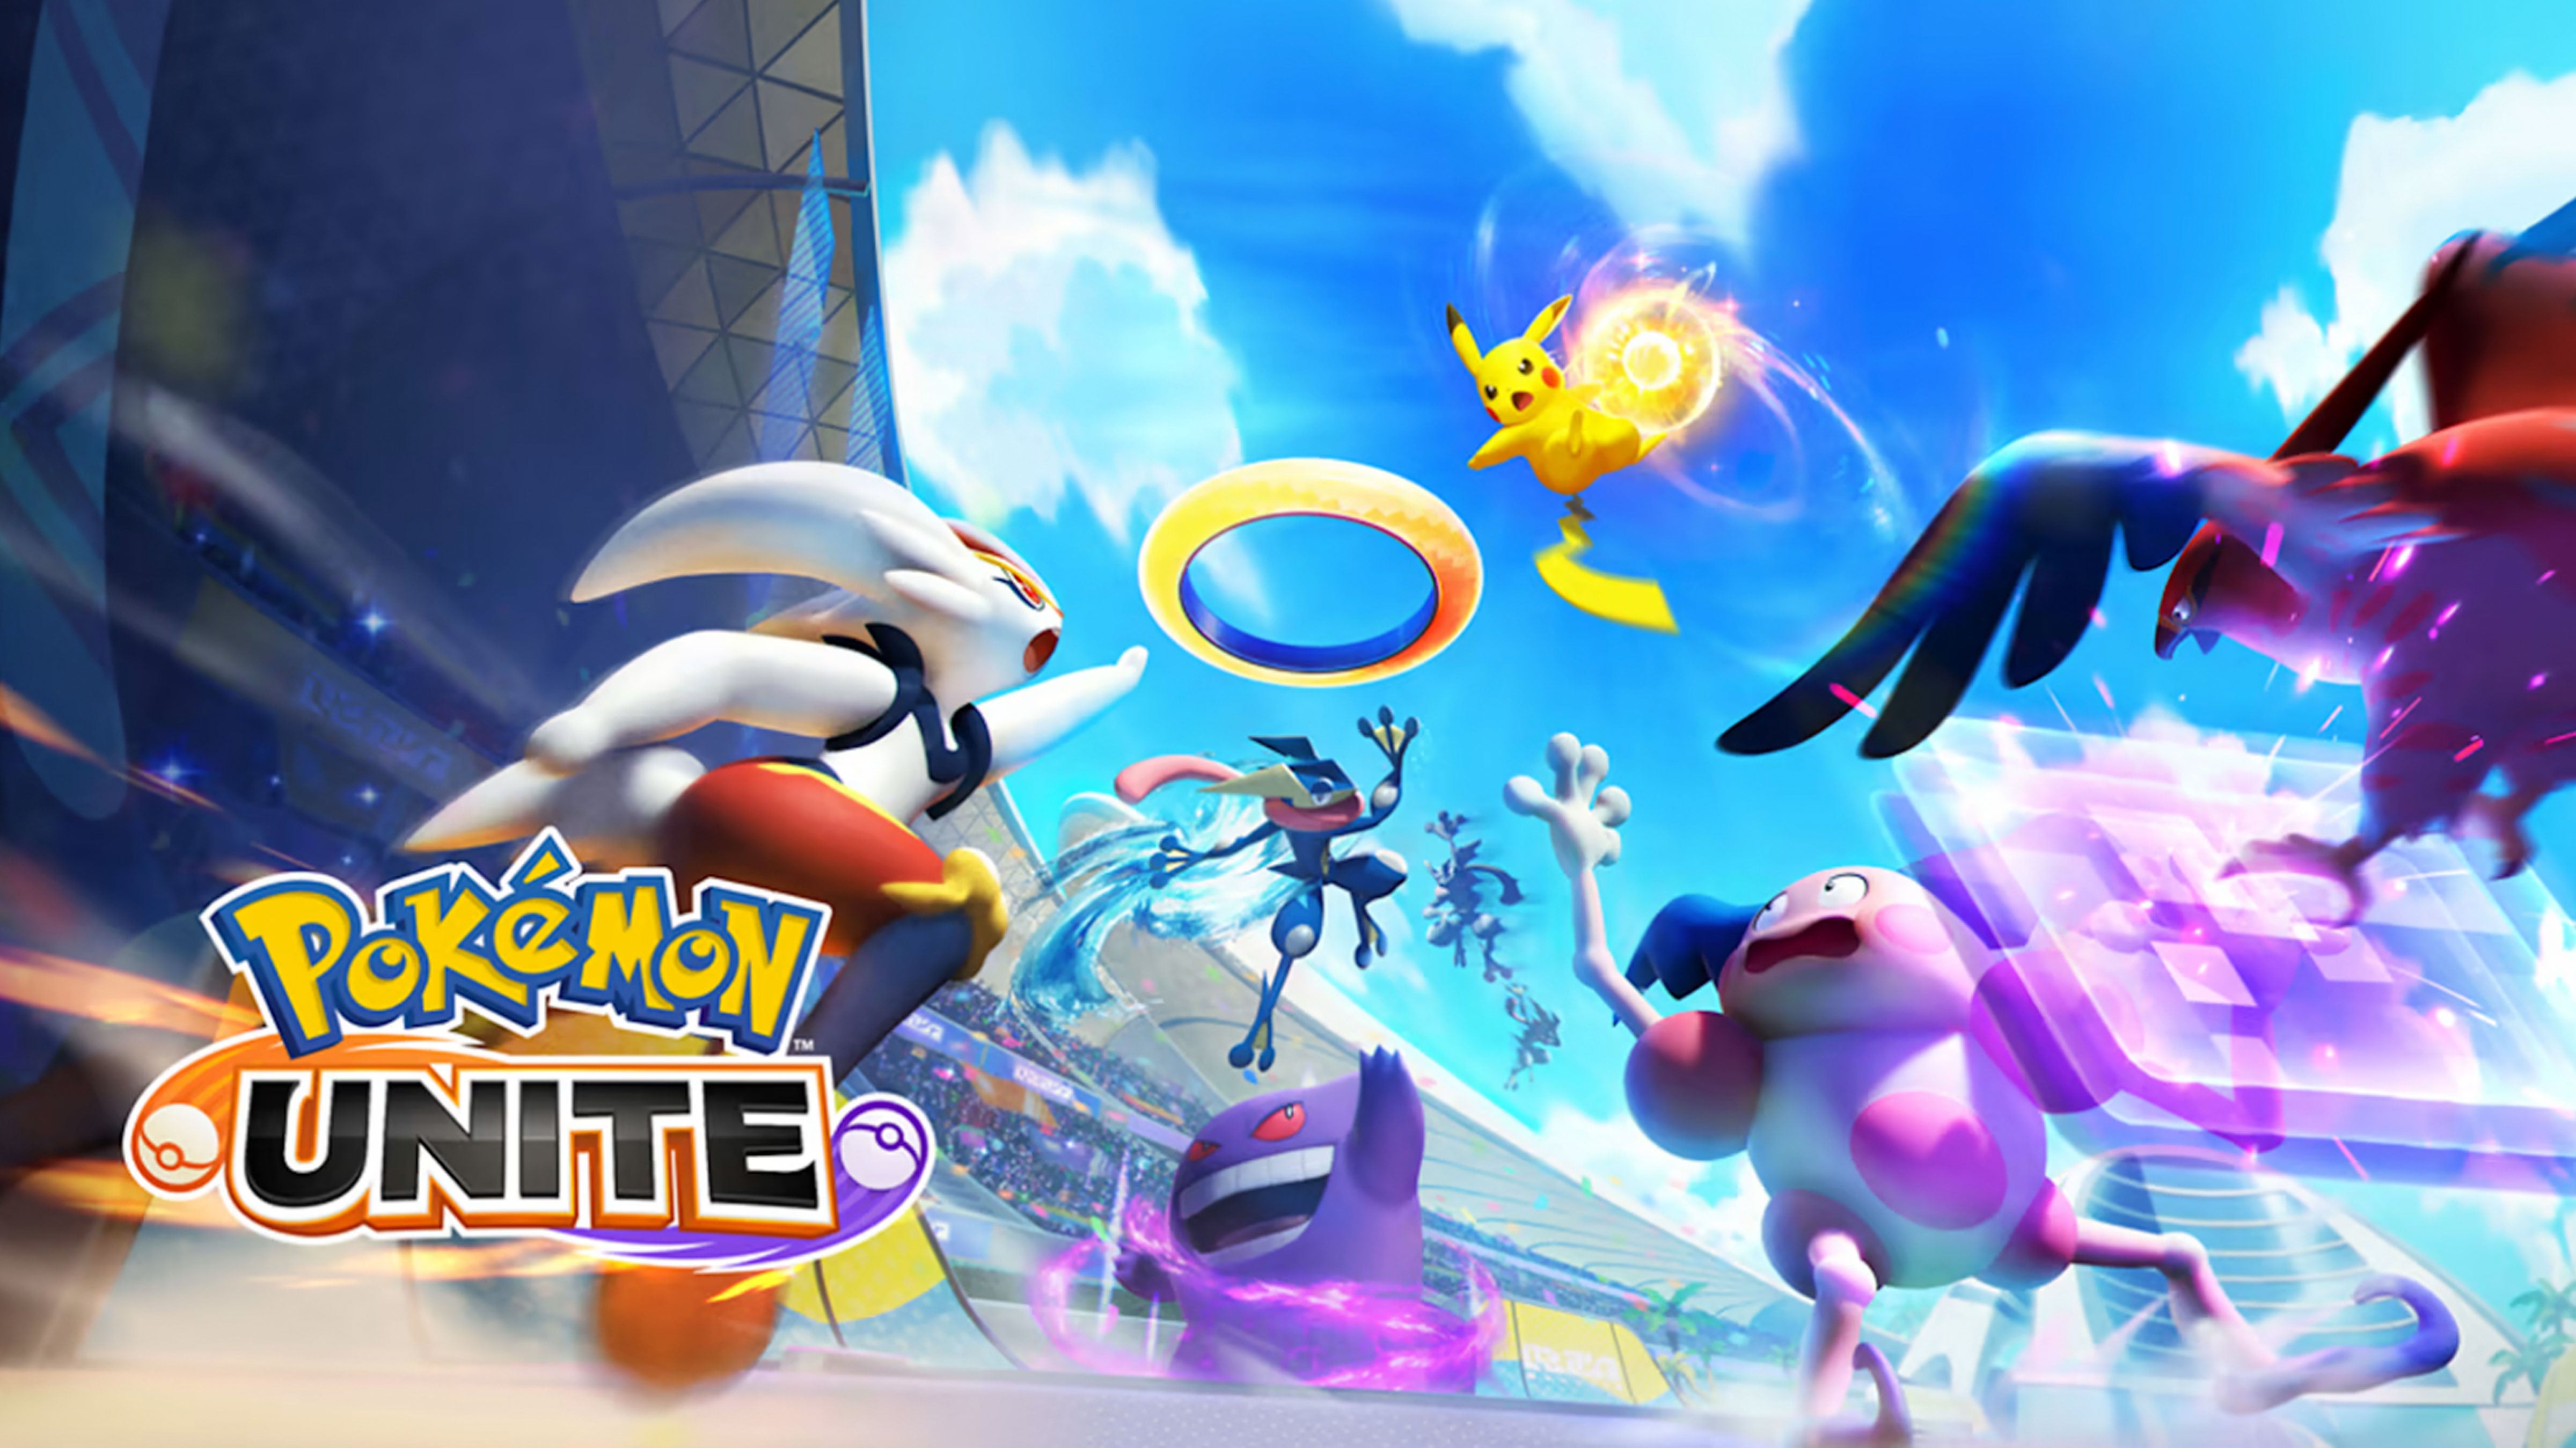 Artwork for Pokemon Unite showing characters like Pikachu, Gengar and Mr Mime facing off in a frenetic battle.